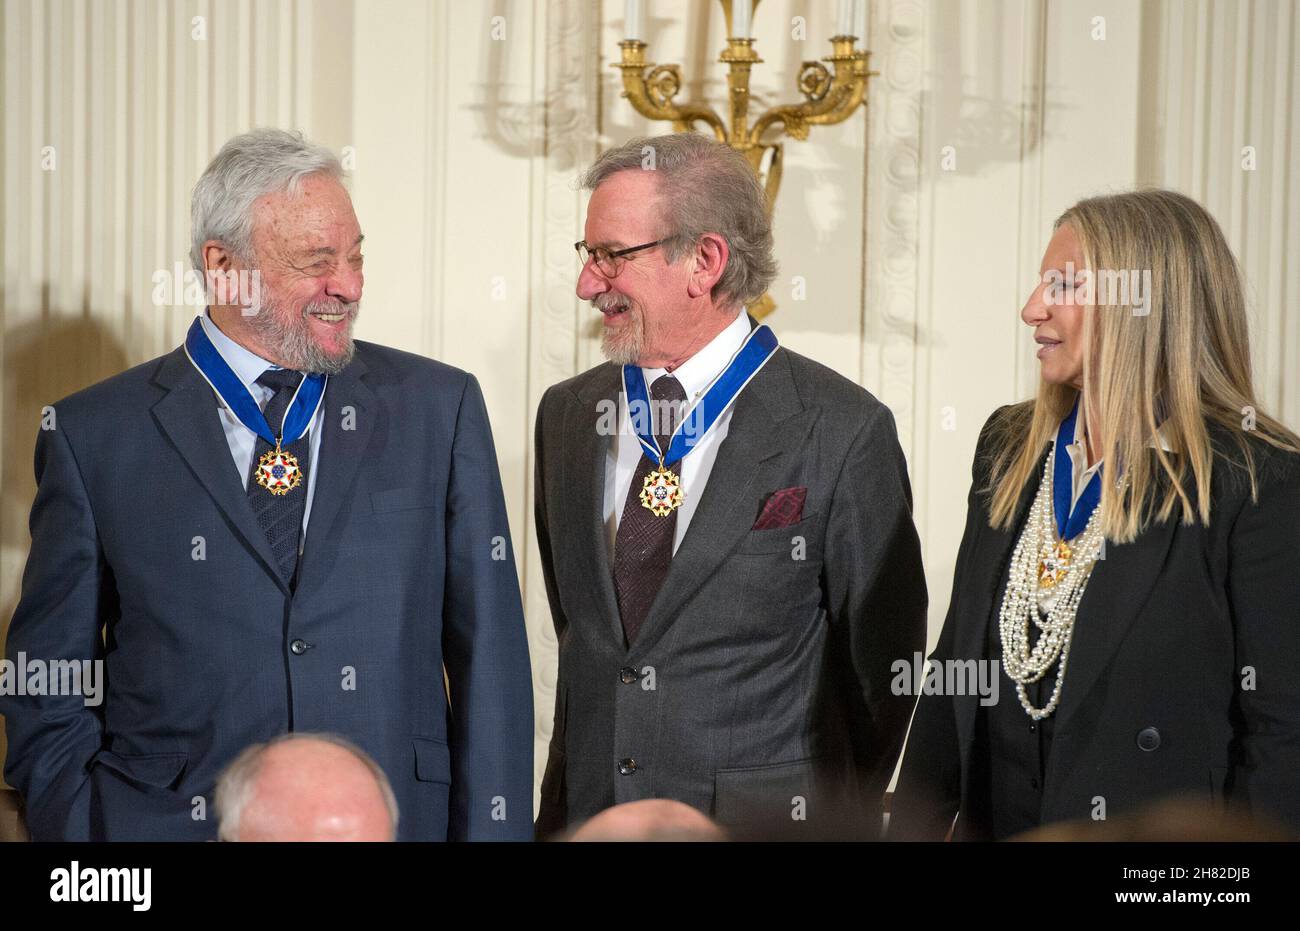 Composer and lyricist Stephen Sondheim, left, American film director, producer, philanthropist, and entrepreneur Steven Spielberg, center, and Singer, actor, director and songwriter Barbra Streisand, right, after receiving the Presidential Medal of Freedom from United States President Barack Obama during a ceremony in the East Room of the White House in Washington, DC on Tuesday, November 24, 2015. The Medal is the highest US civilian honor, presented to individuals who have made especially meritorious contributions to the security or national interests of the US, to world peace, or to cultura Stock Photo